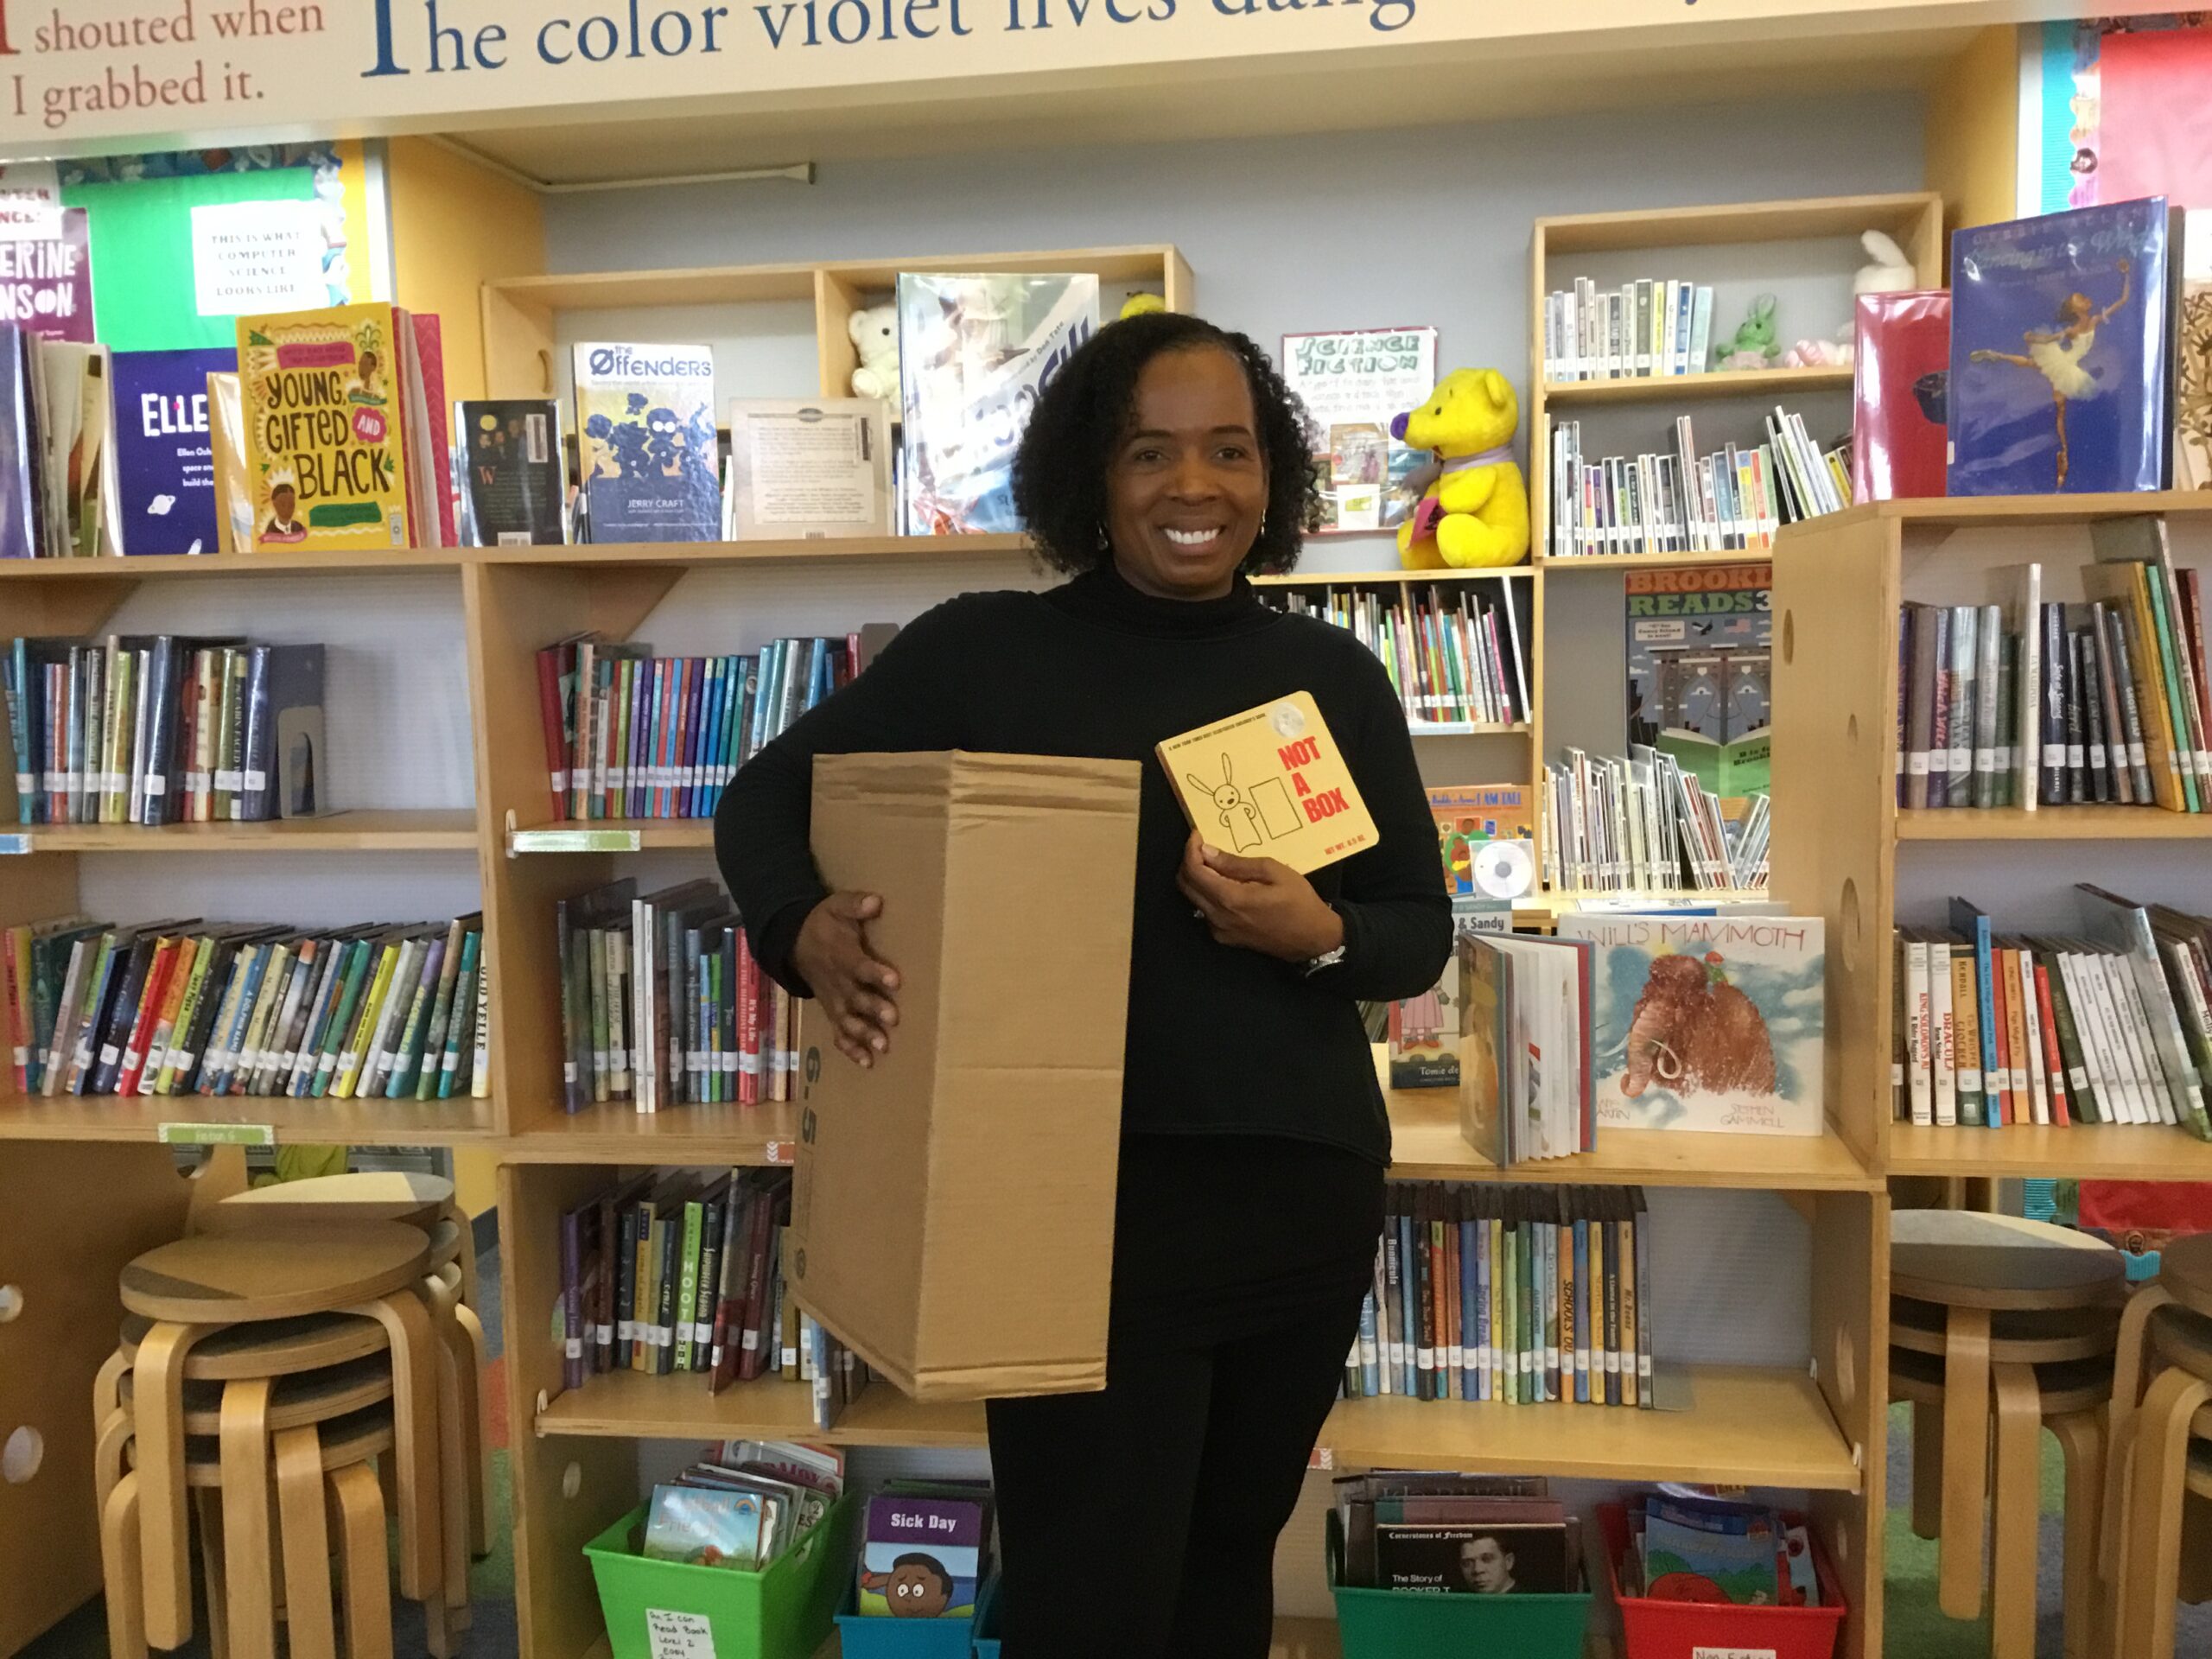 A photo of Ms. White Dressing Up for Character Day as “Not A Box!”